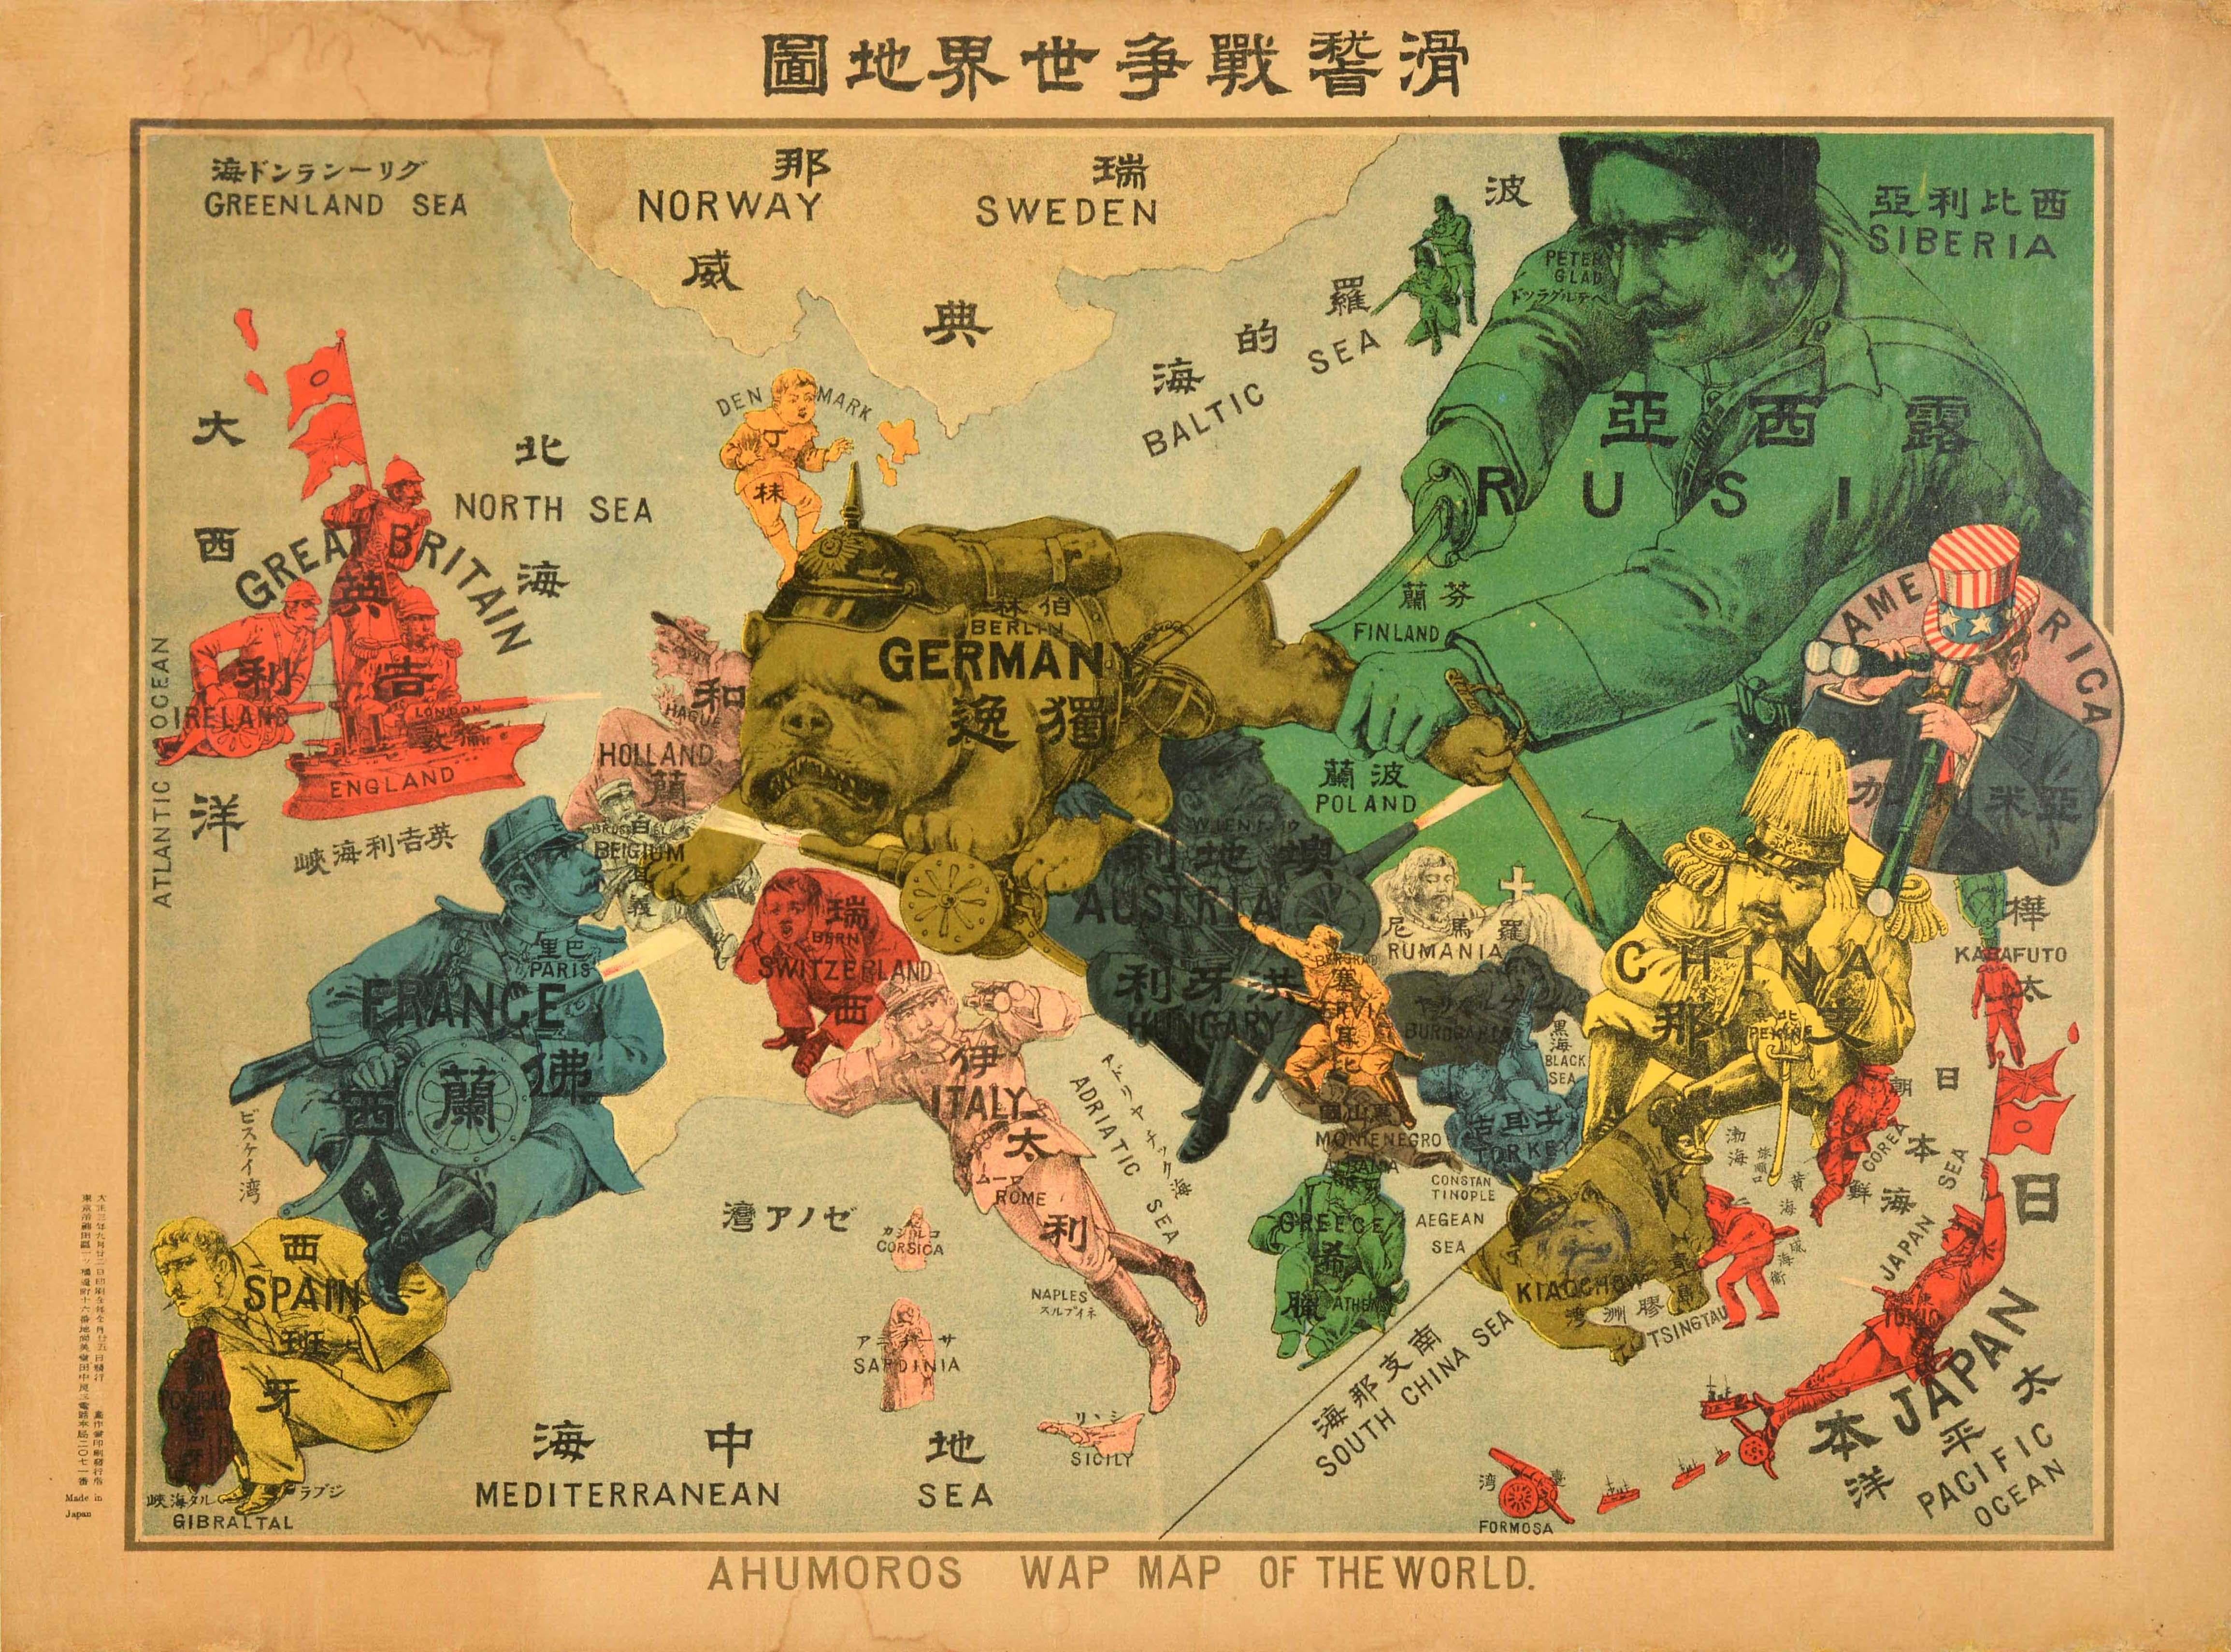 Unknown Print - Original Antique World War One Humoros Wap Map Of The World WWI Japan Caricature